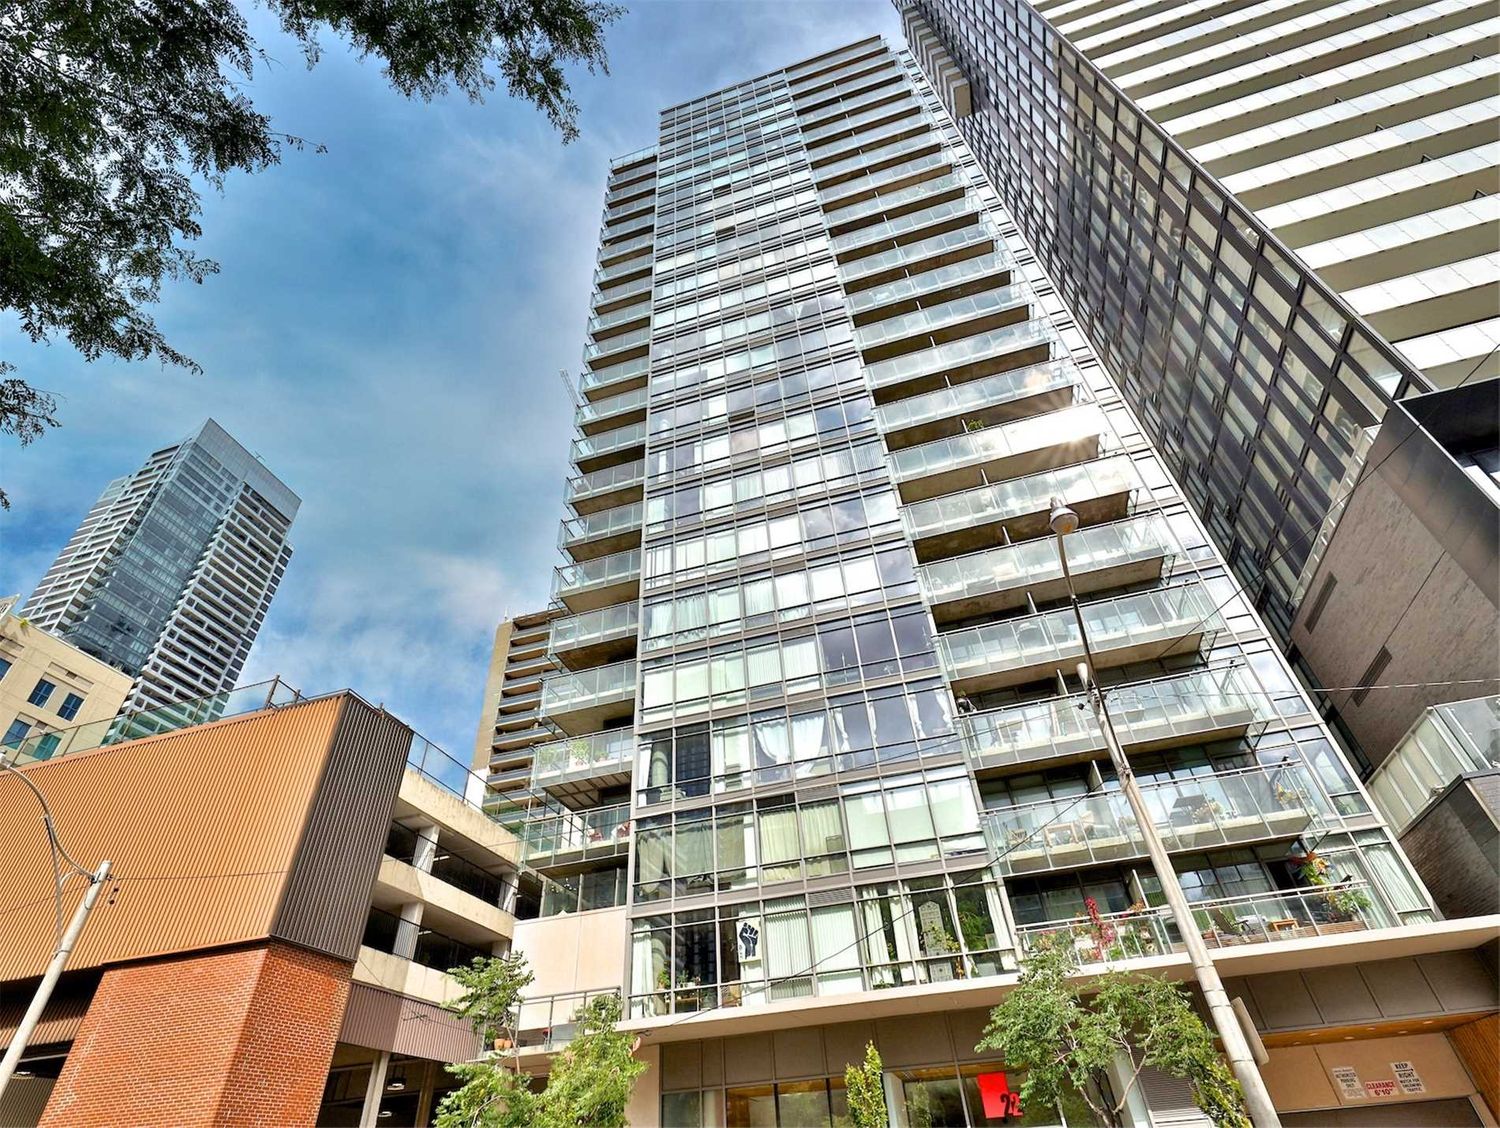 22 Wellesley Street E. 22 Condominiums is located in  Downtown, Toronto - image #1 of 3